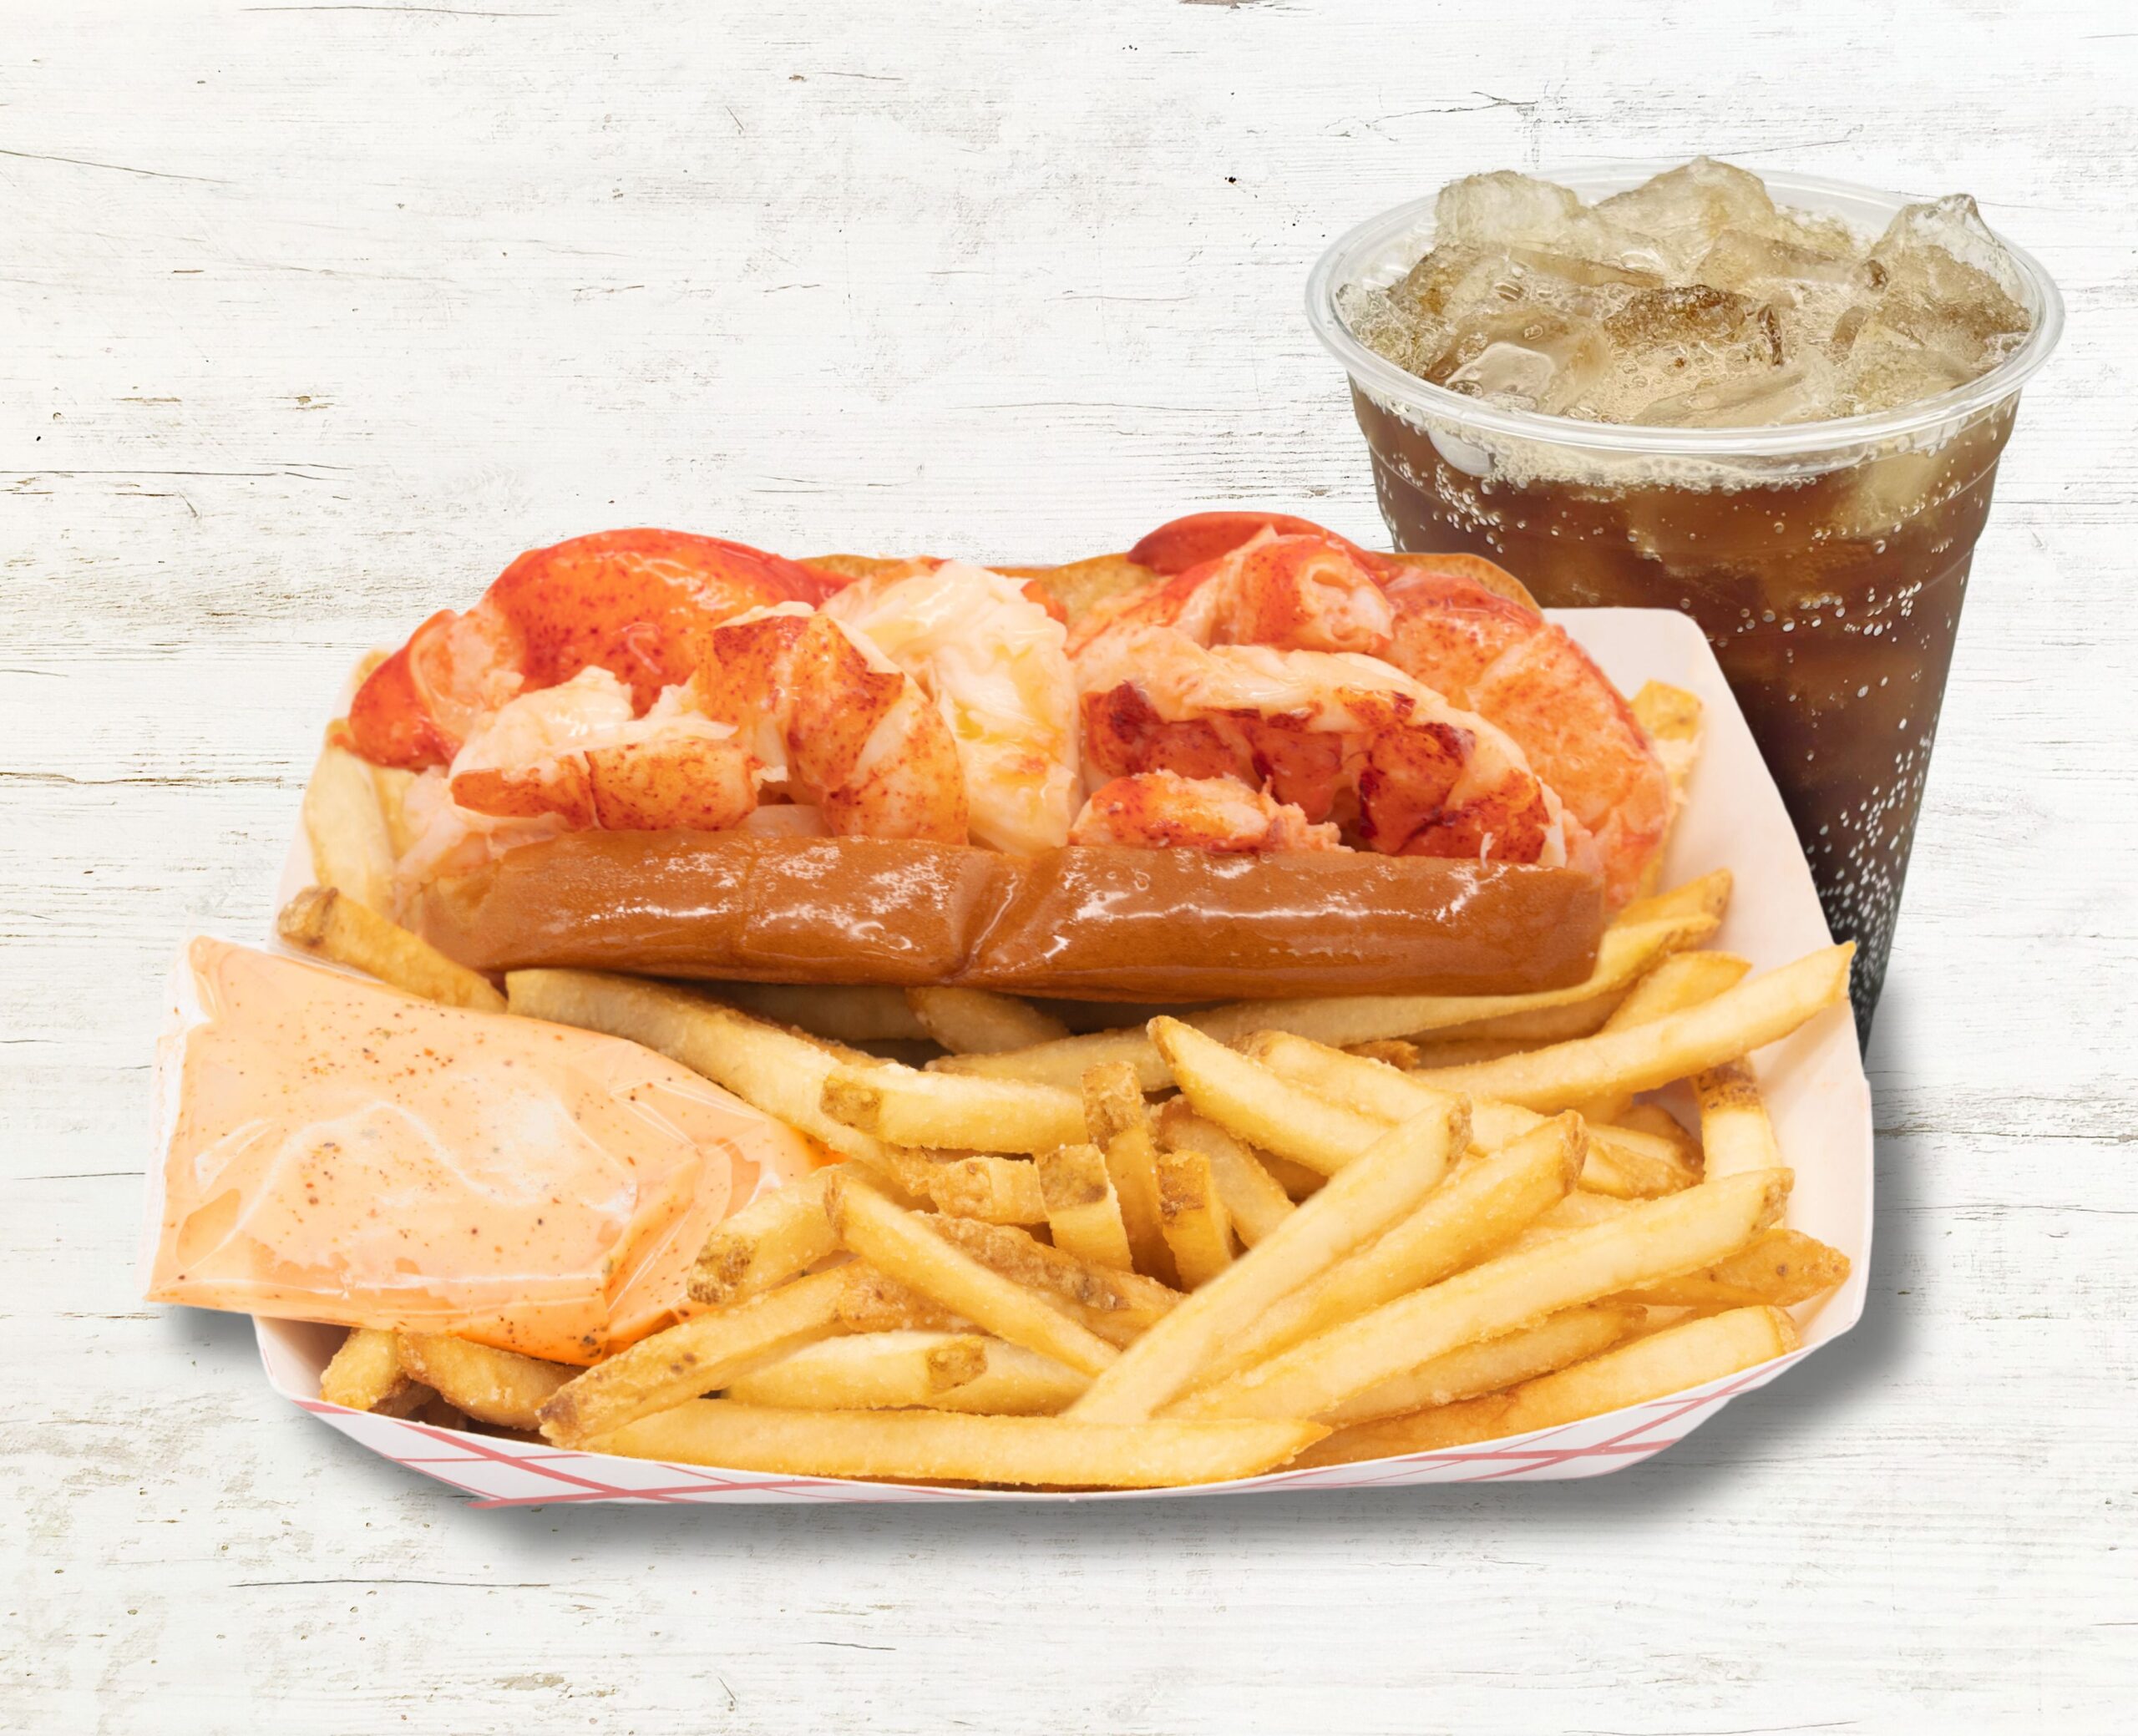 Image for #1 Warm Lobster Roll with Butter